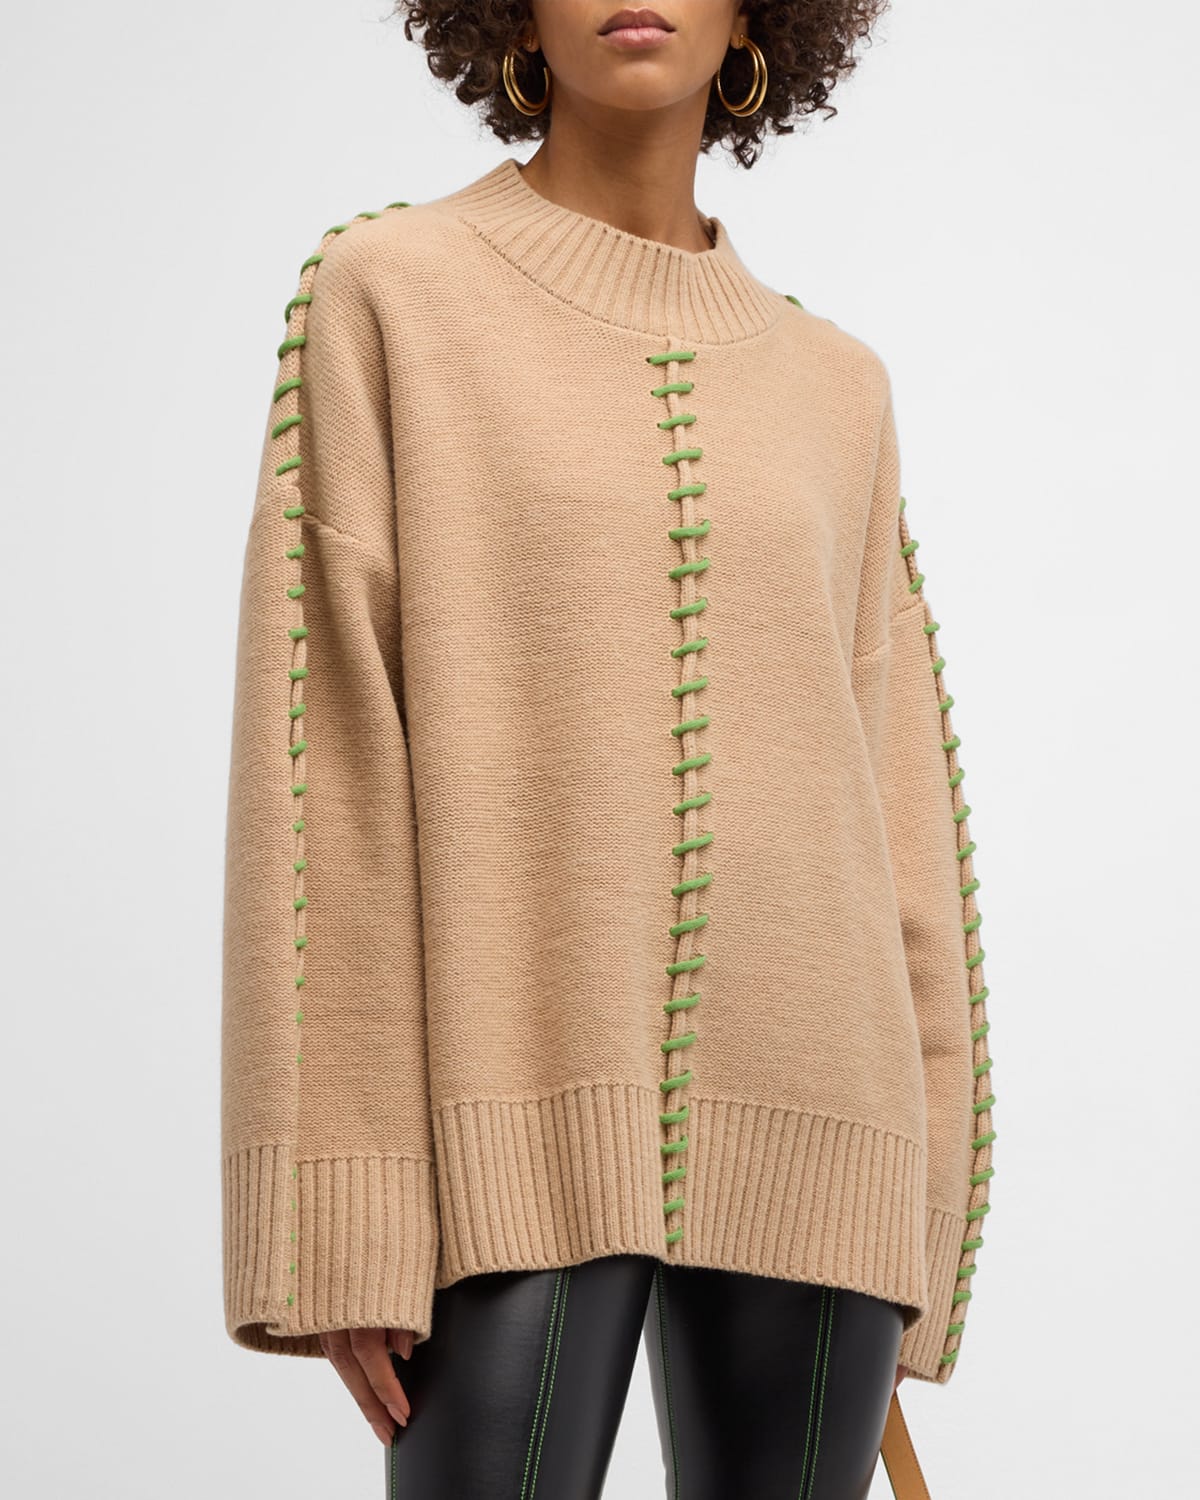 SIMON MILLER LEITH OVERSIZED LACE-UP SWEATER